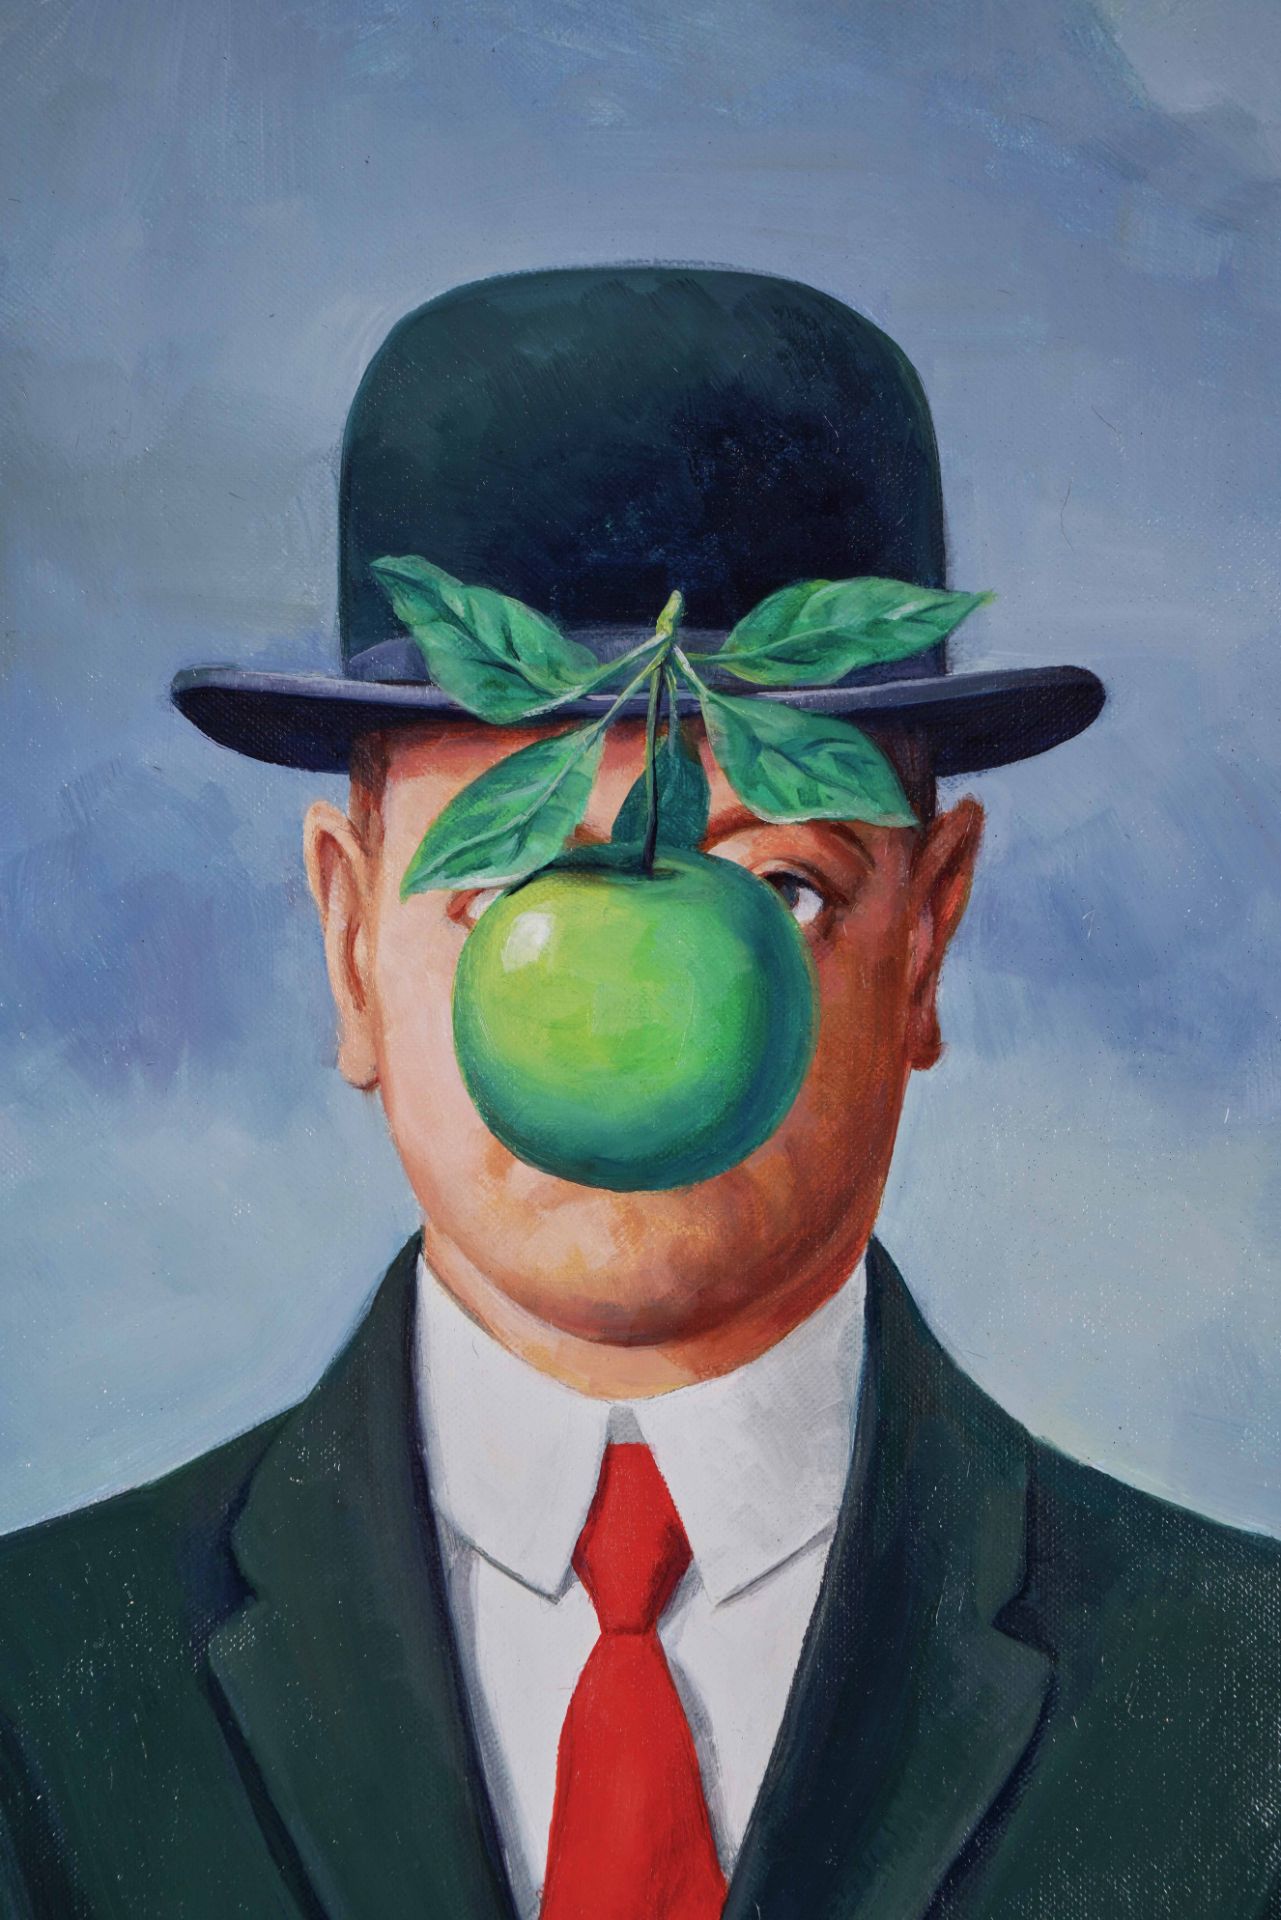 Rene Magritte (1898-1967), Oil Painting - Image 2 of 6